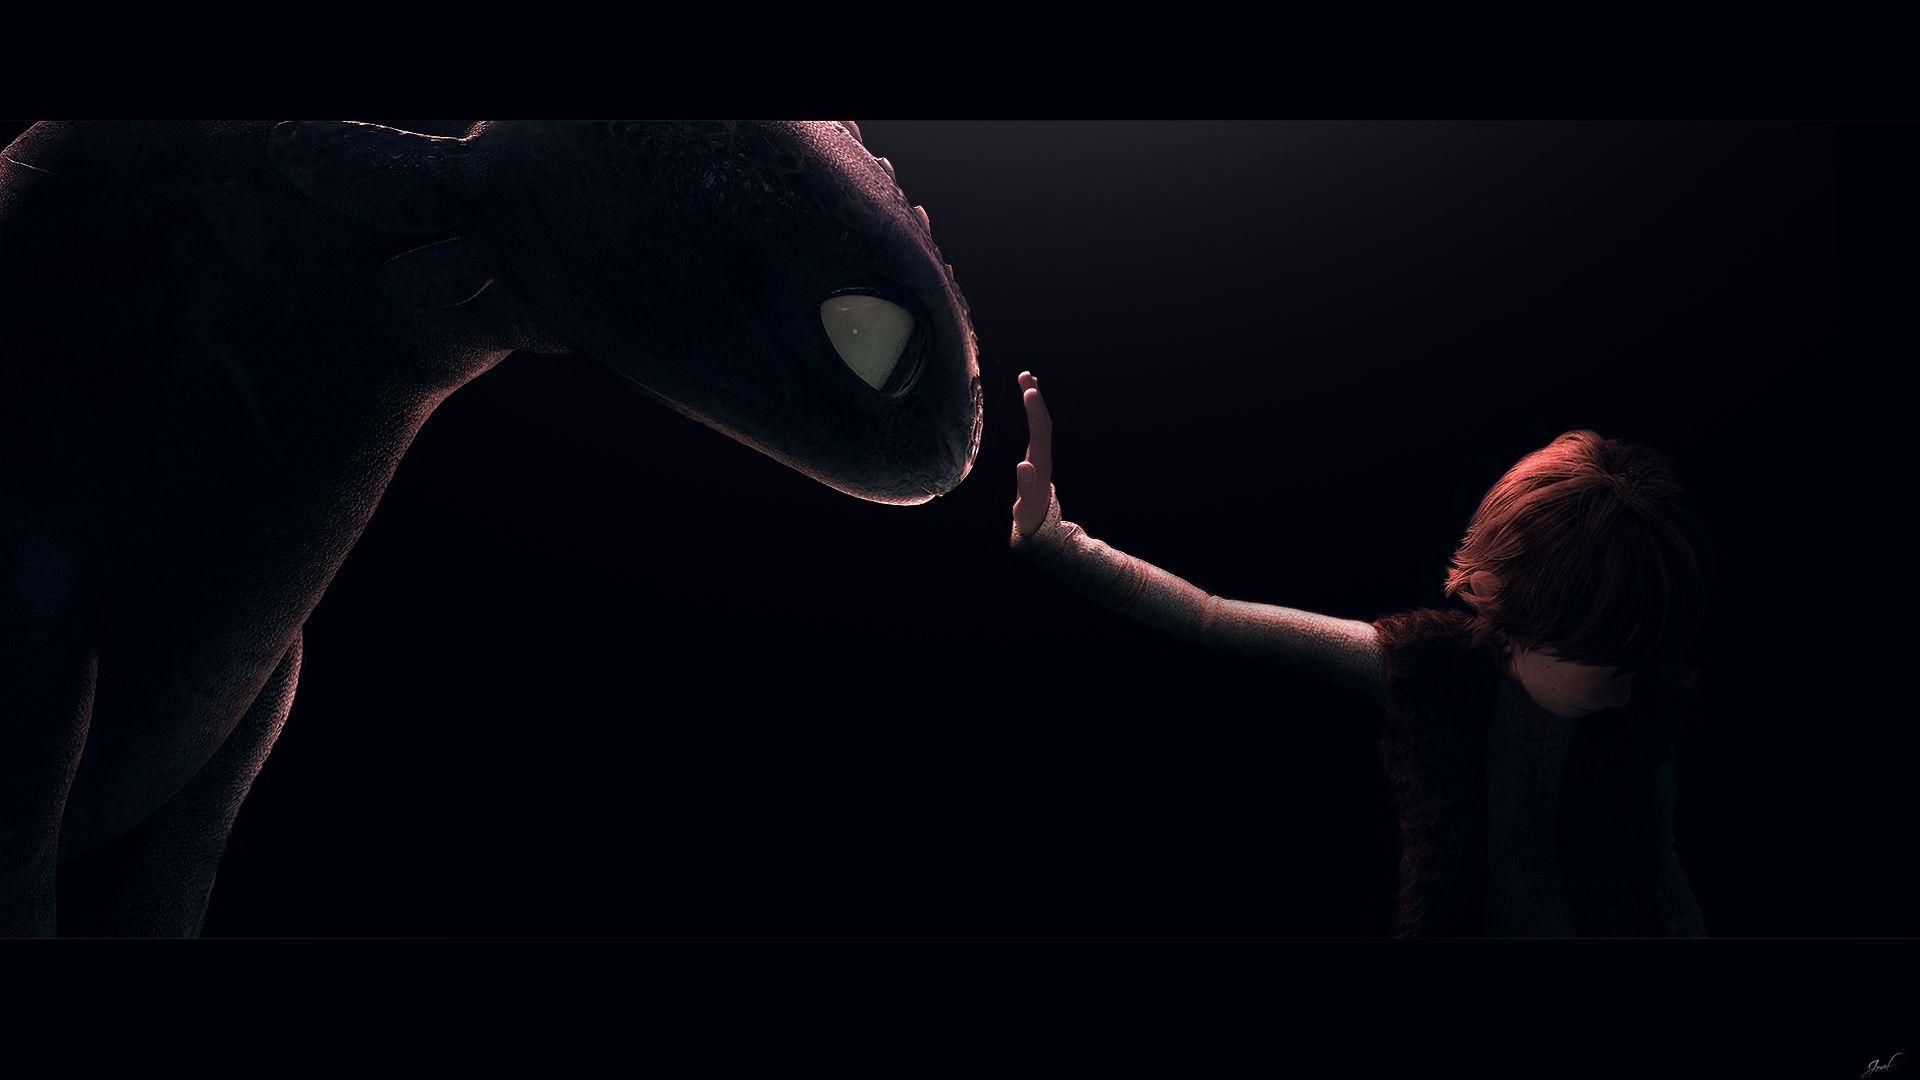 toothless, How to Train Your Dragon, Hiccup wallpaper